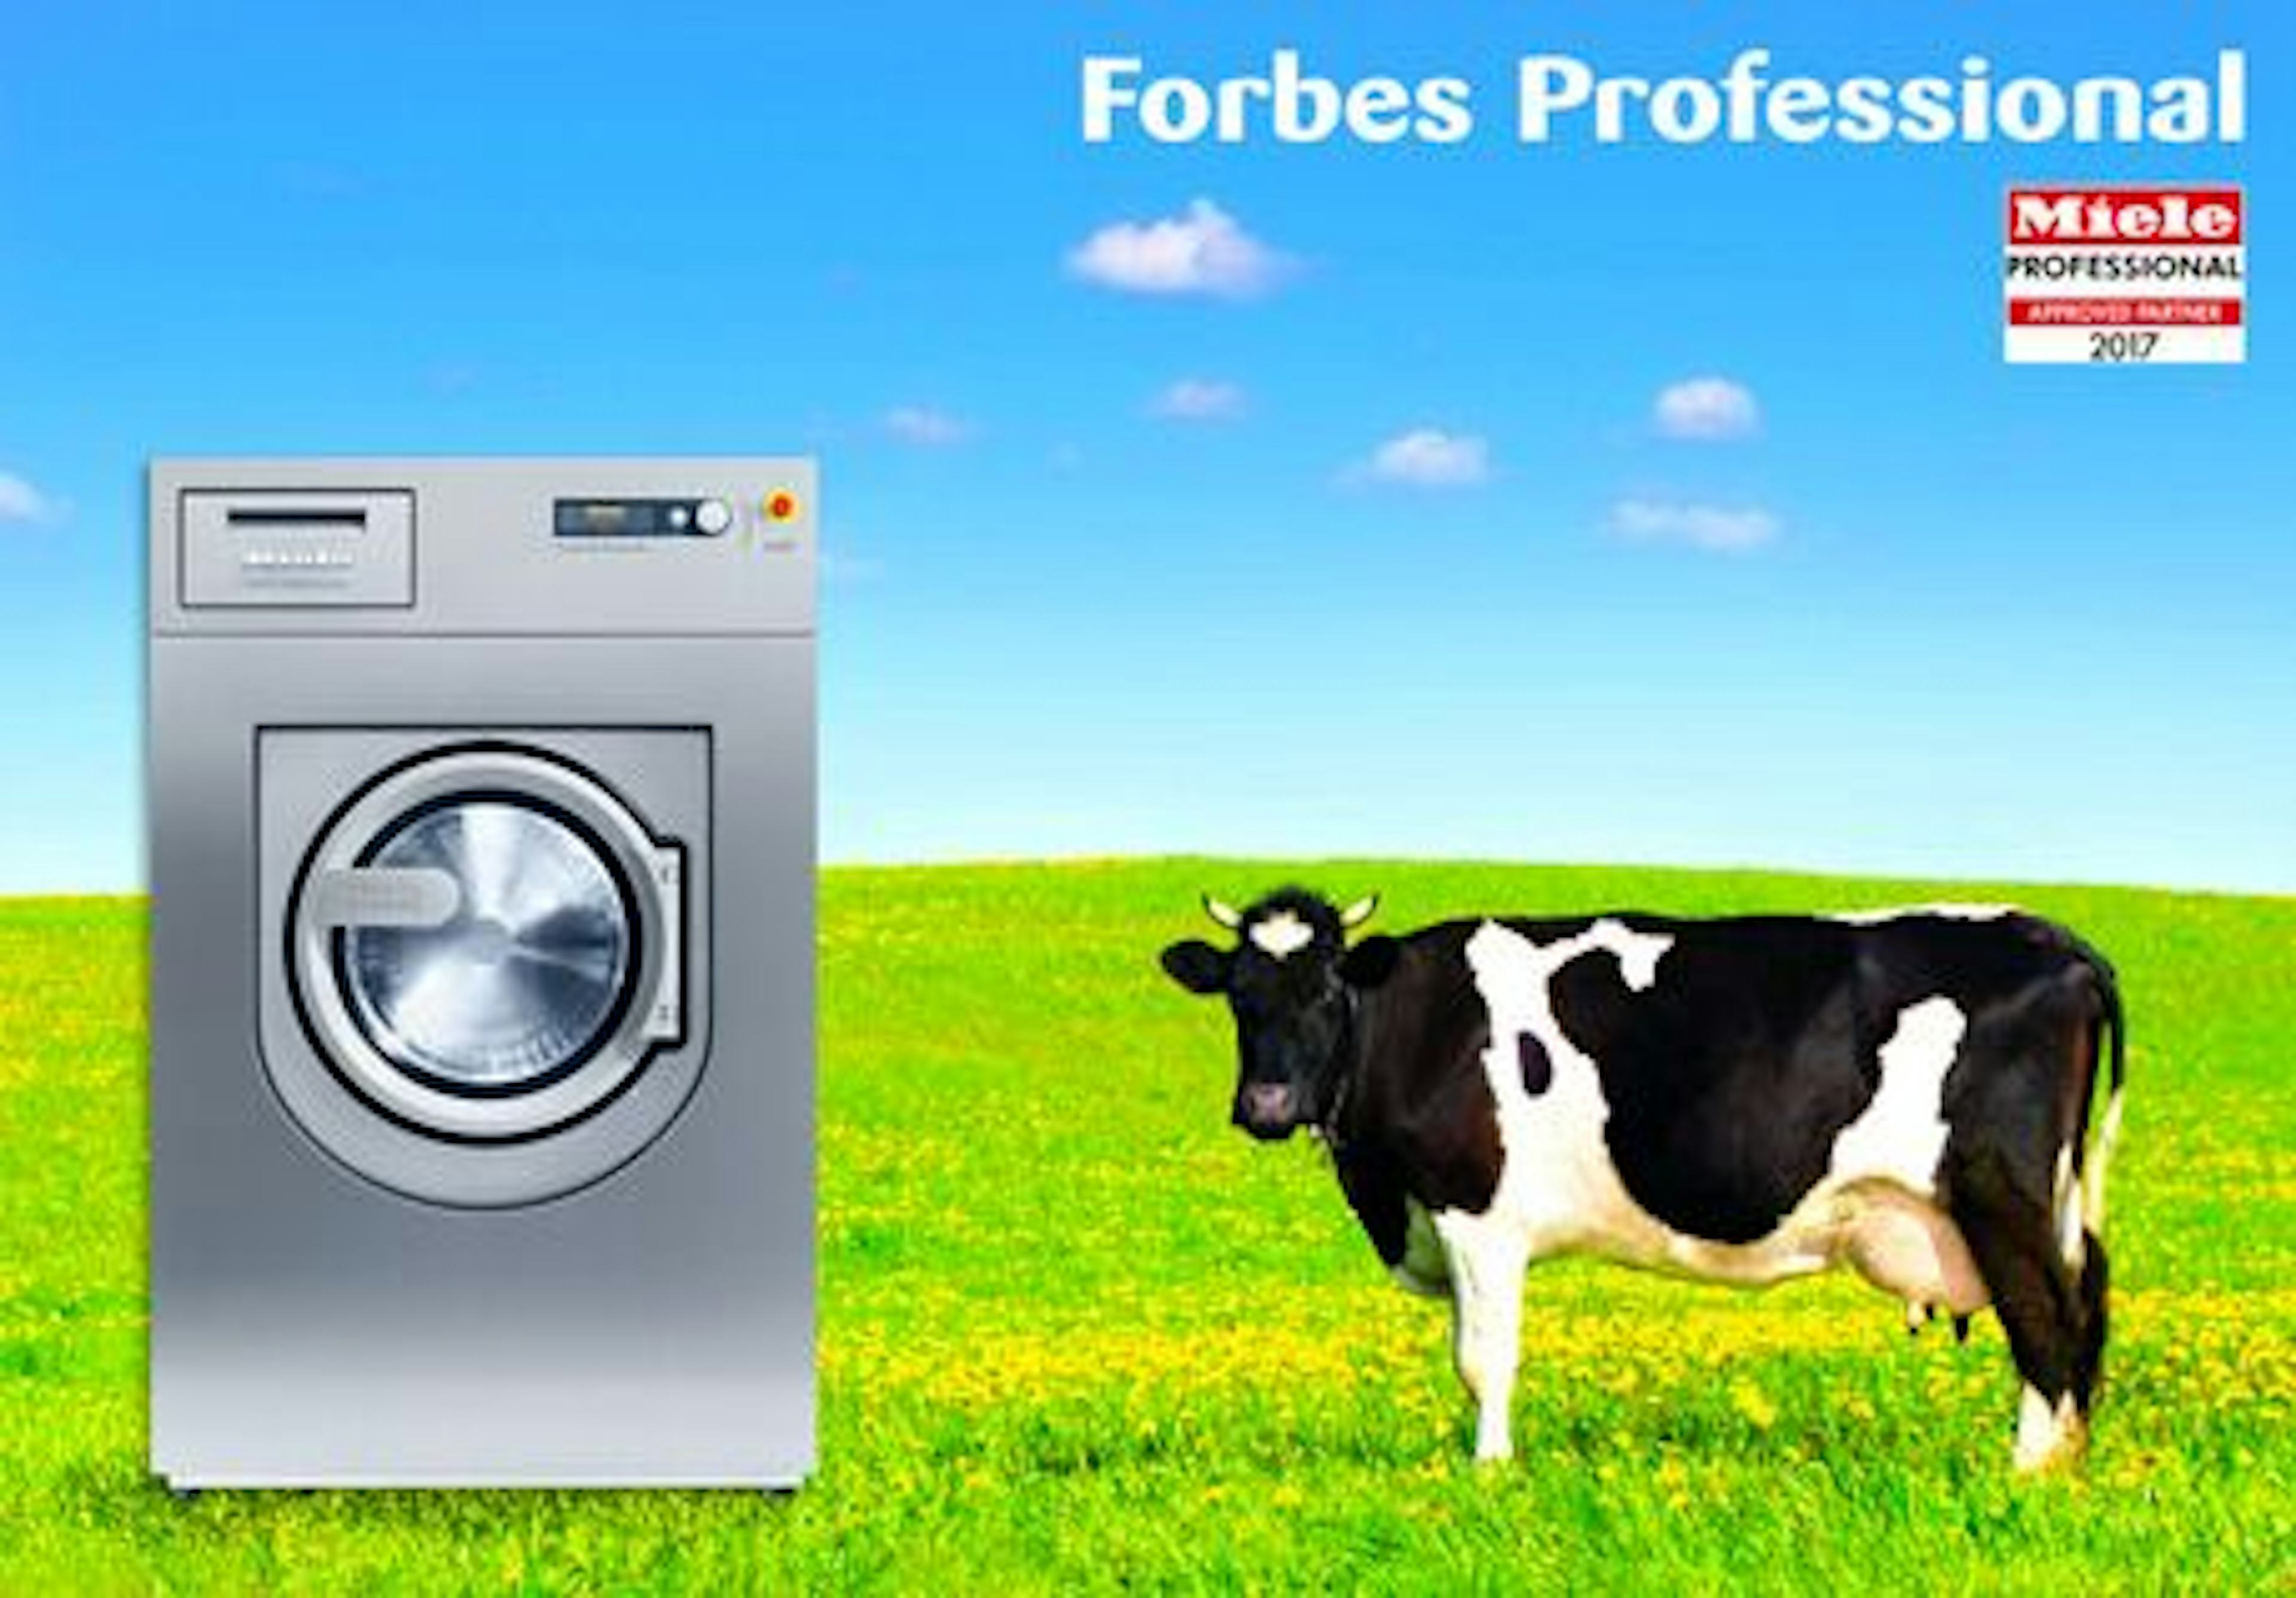 Dairies Cut Costs with Re-Usable Udder Wipes and In-House Laundry Operations.